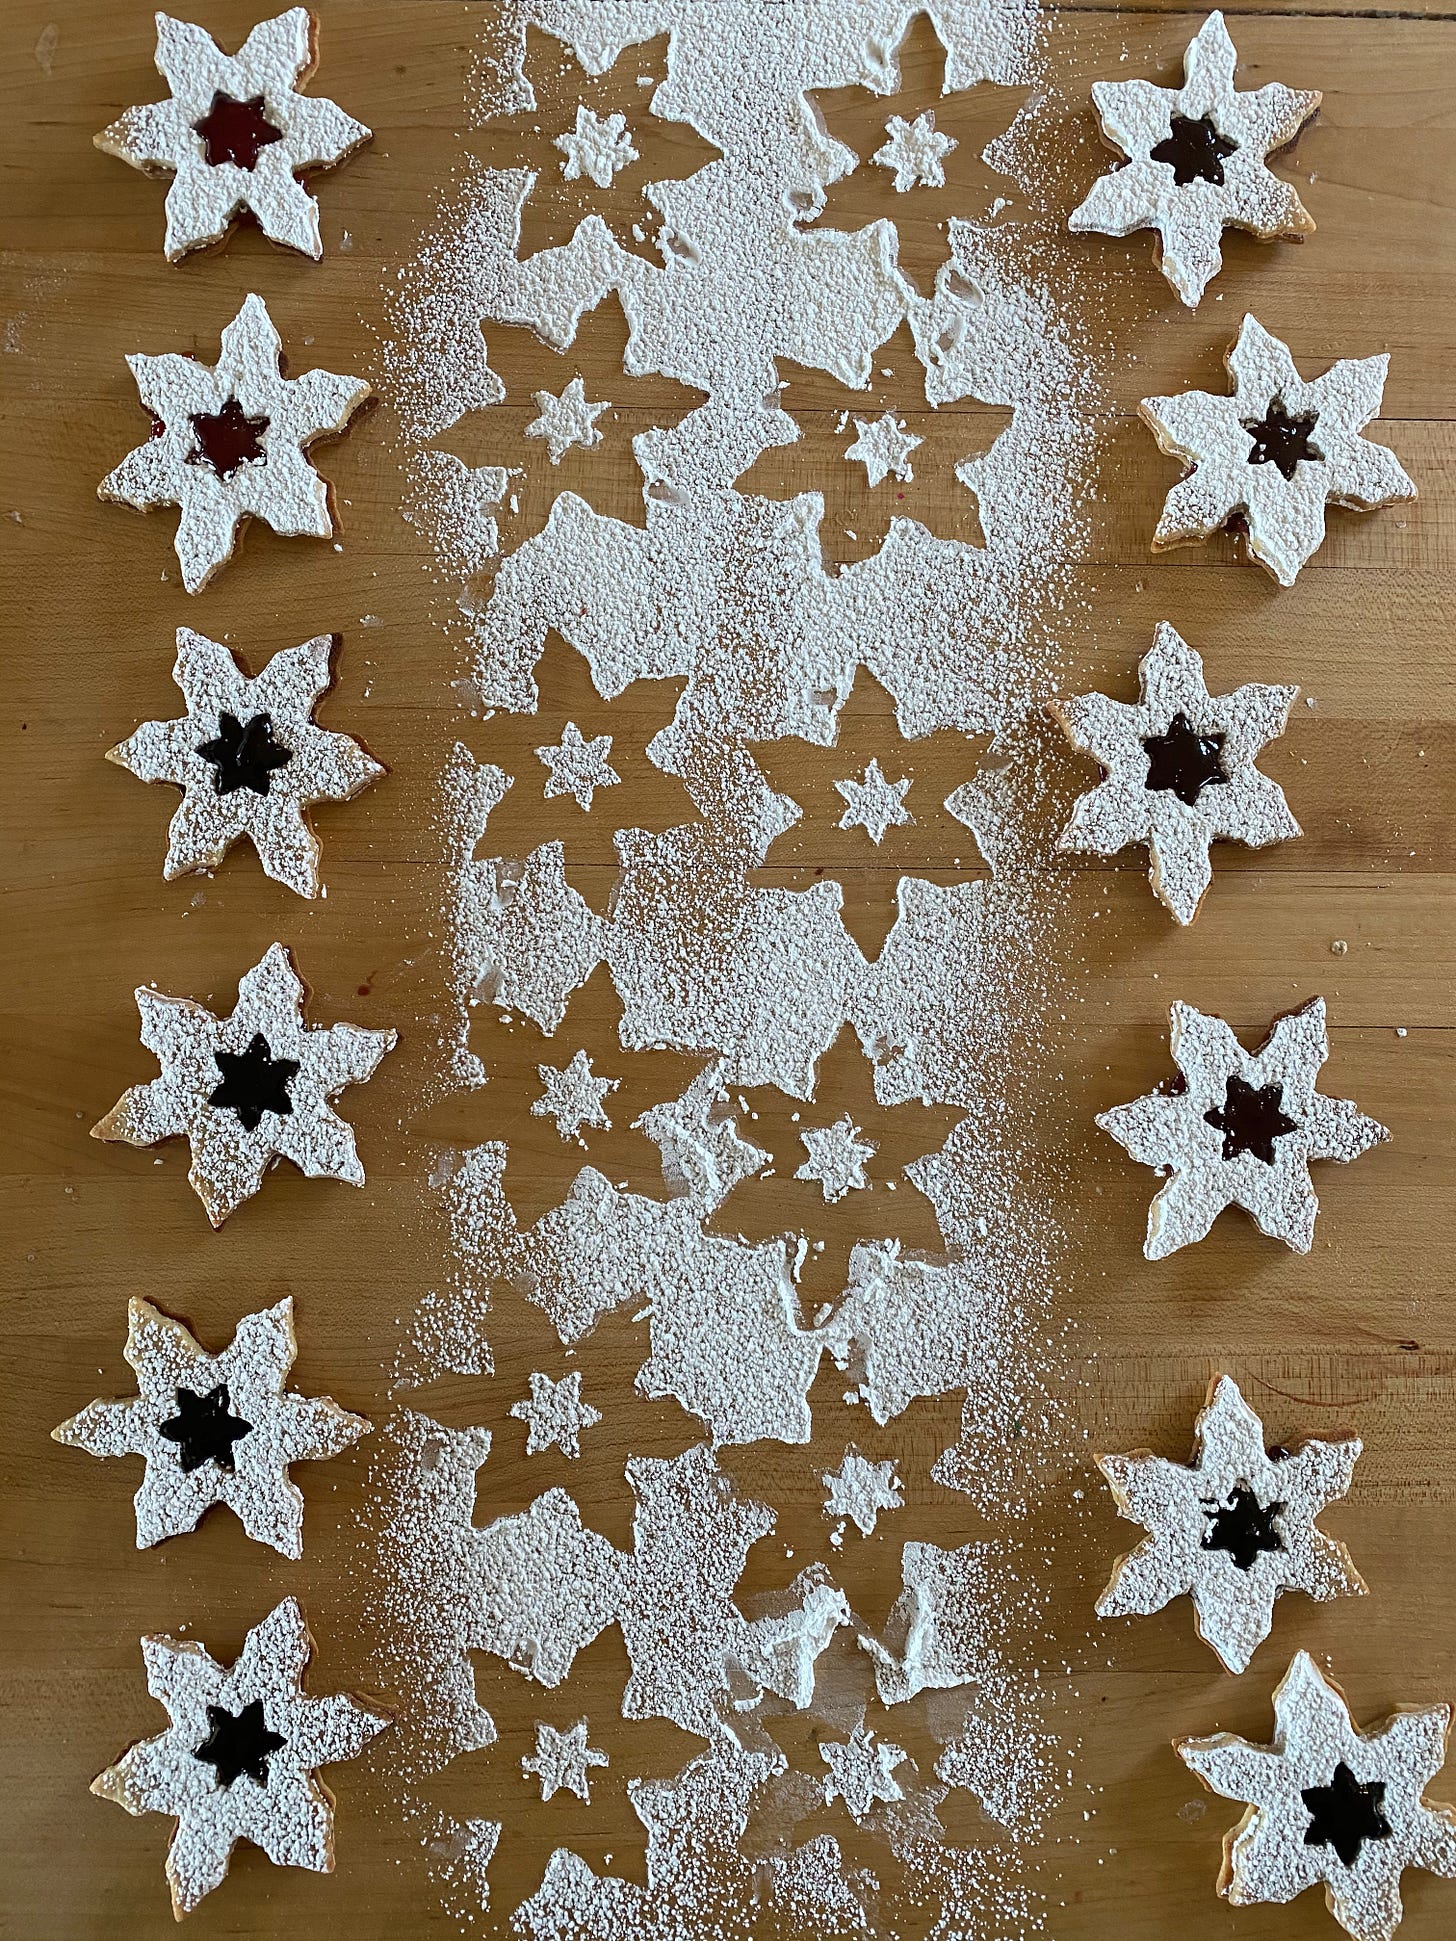 Two rows of star-shaped Linzer cookies on a wooden counter. They are coated in powder sugar, and each one has a small star-shaped opening through which the jam filling is visible. Between the two rows of cookies, the counter is covered in powdered sugar, showing the star-shaped outlines of where the cookies were.